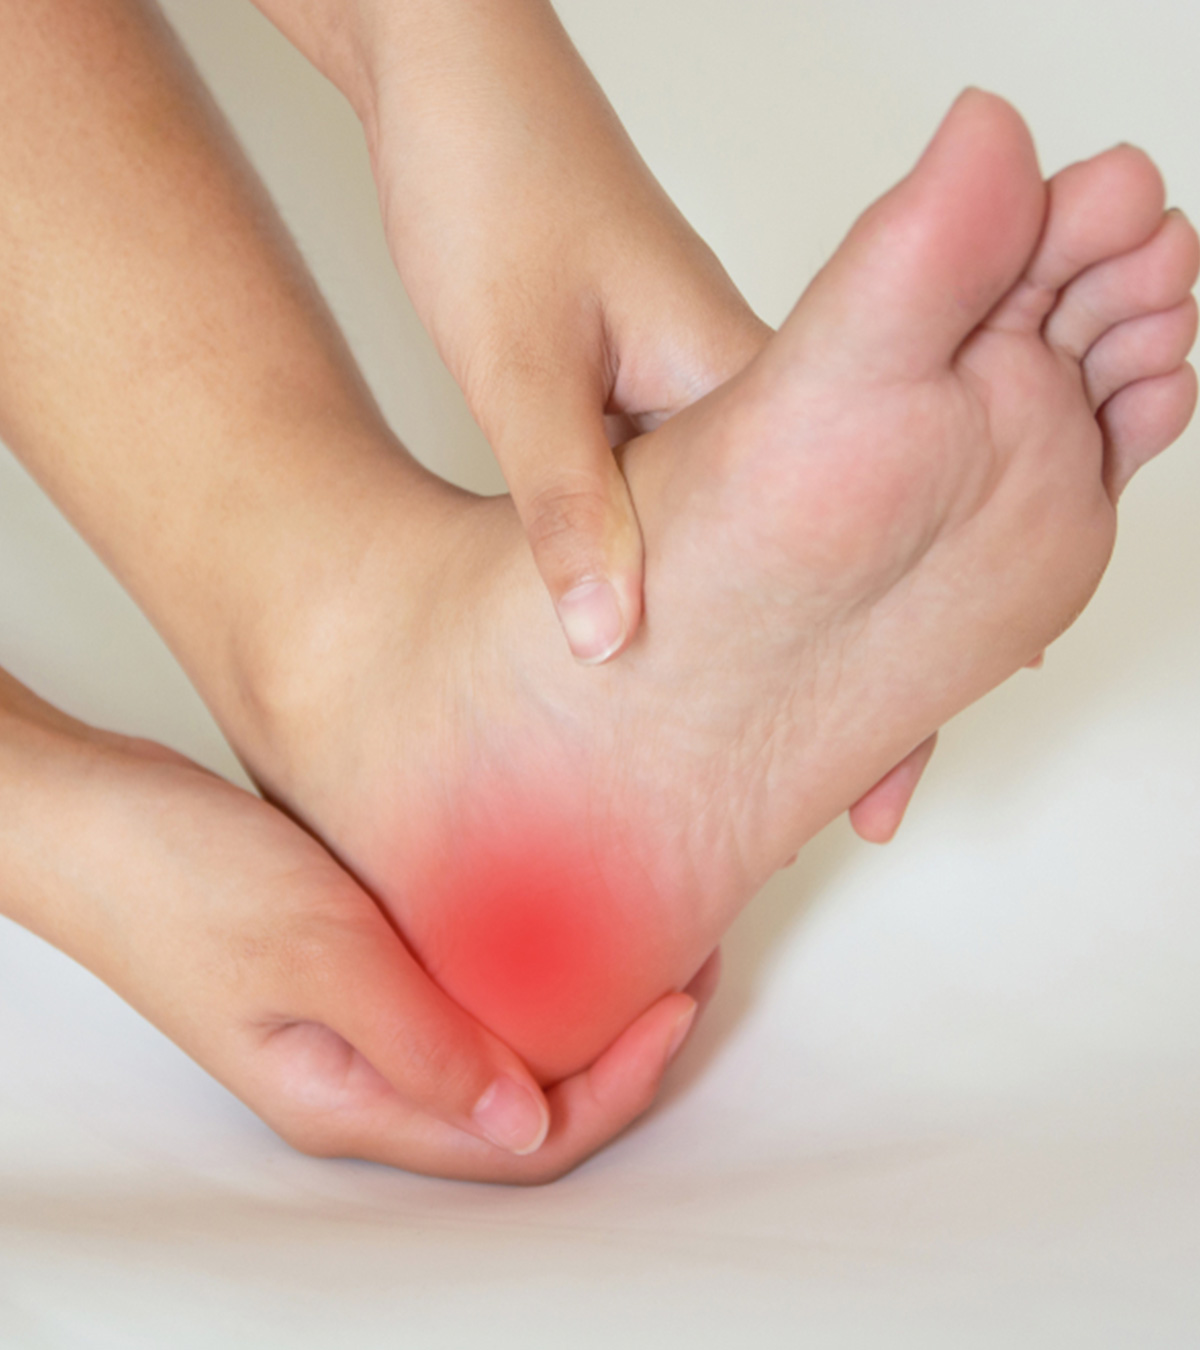 4 Common Causes Of Heel Pain In Kids: Treatment & Prevention